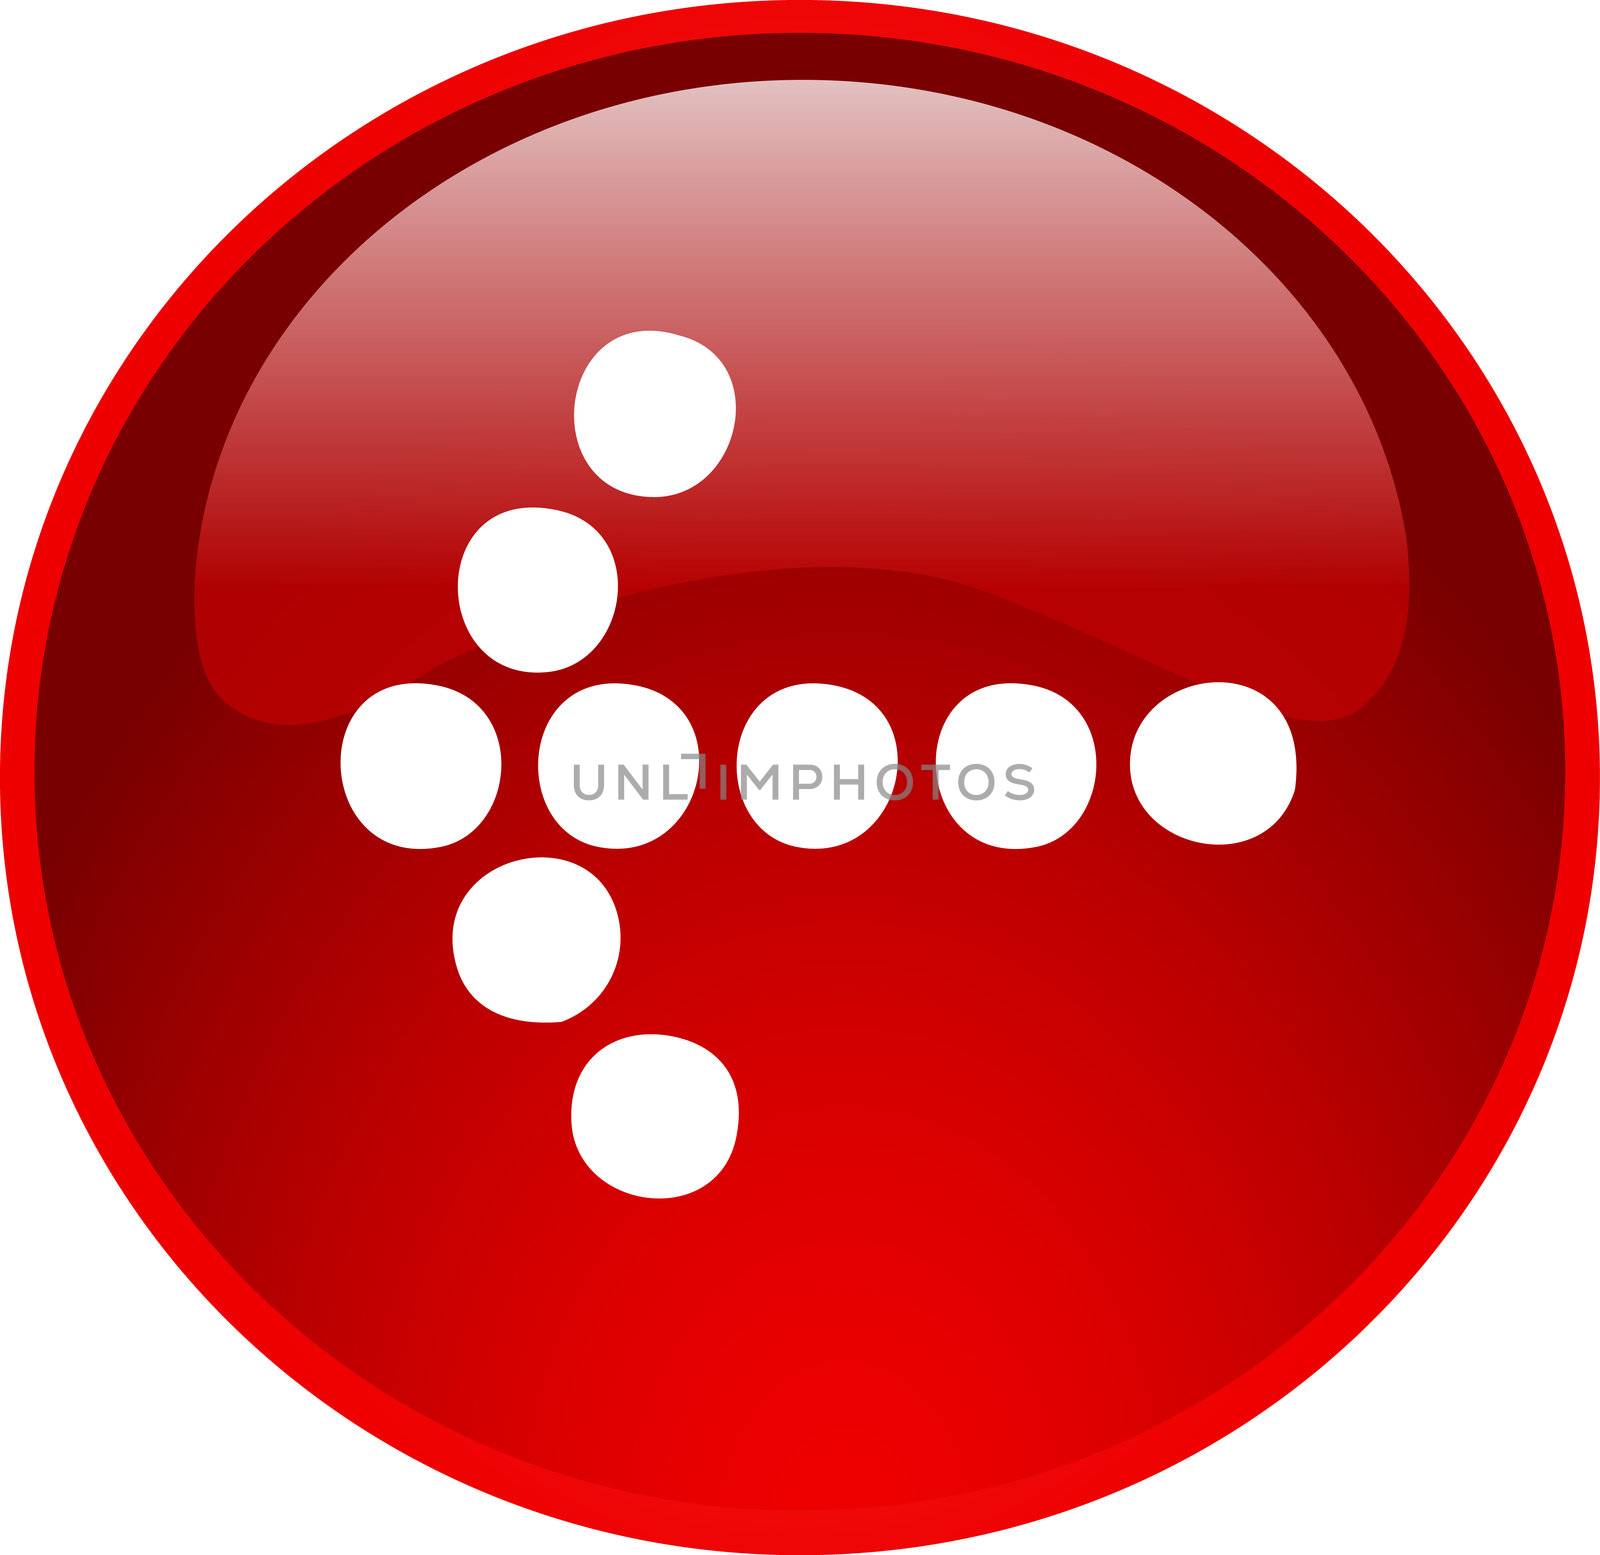 illustration of a red arrow button